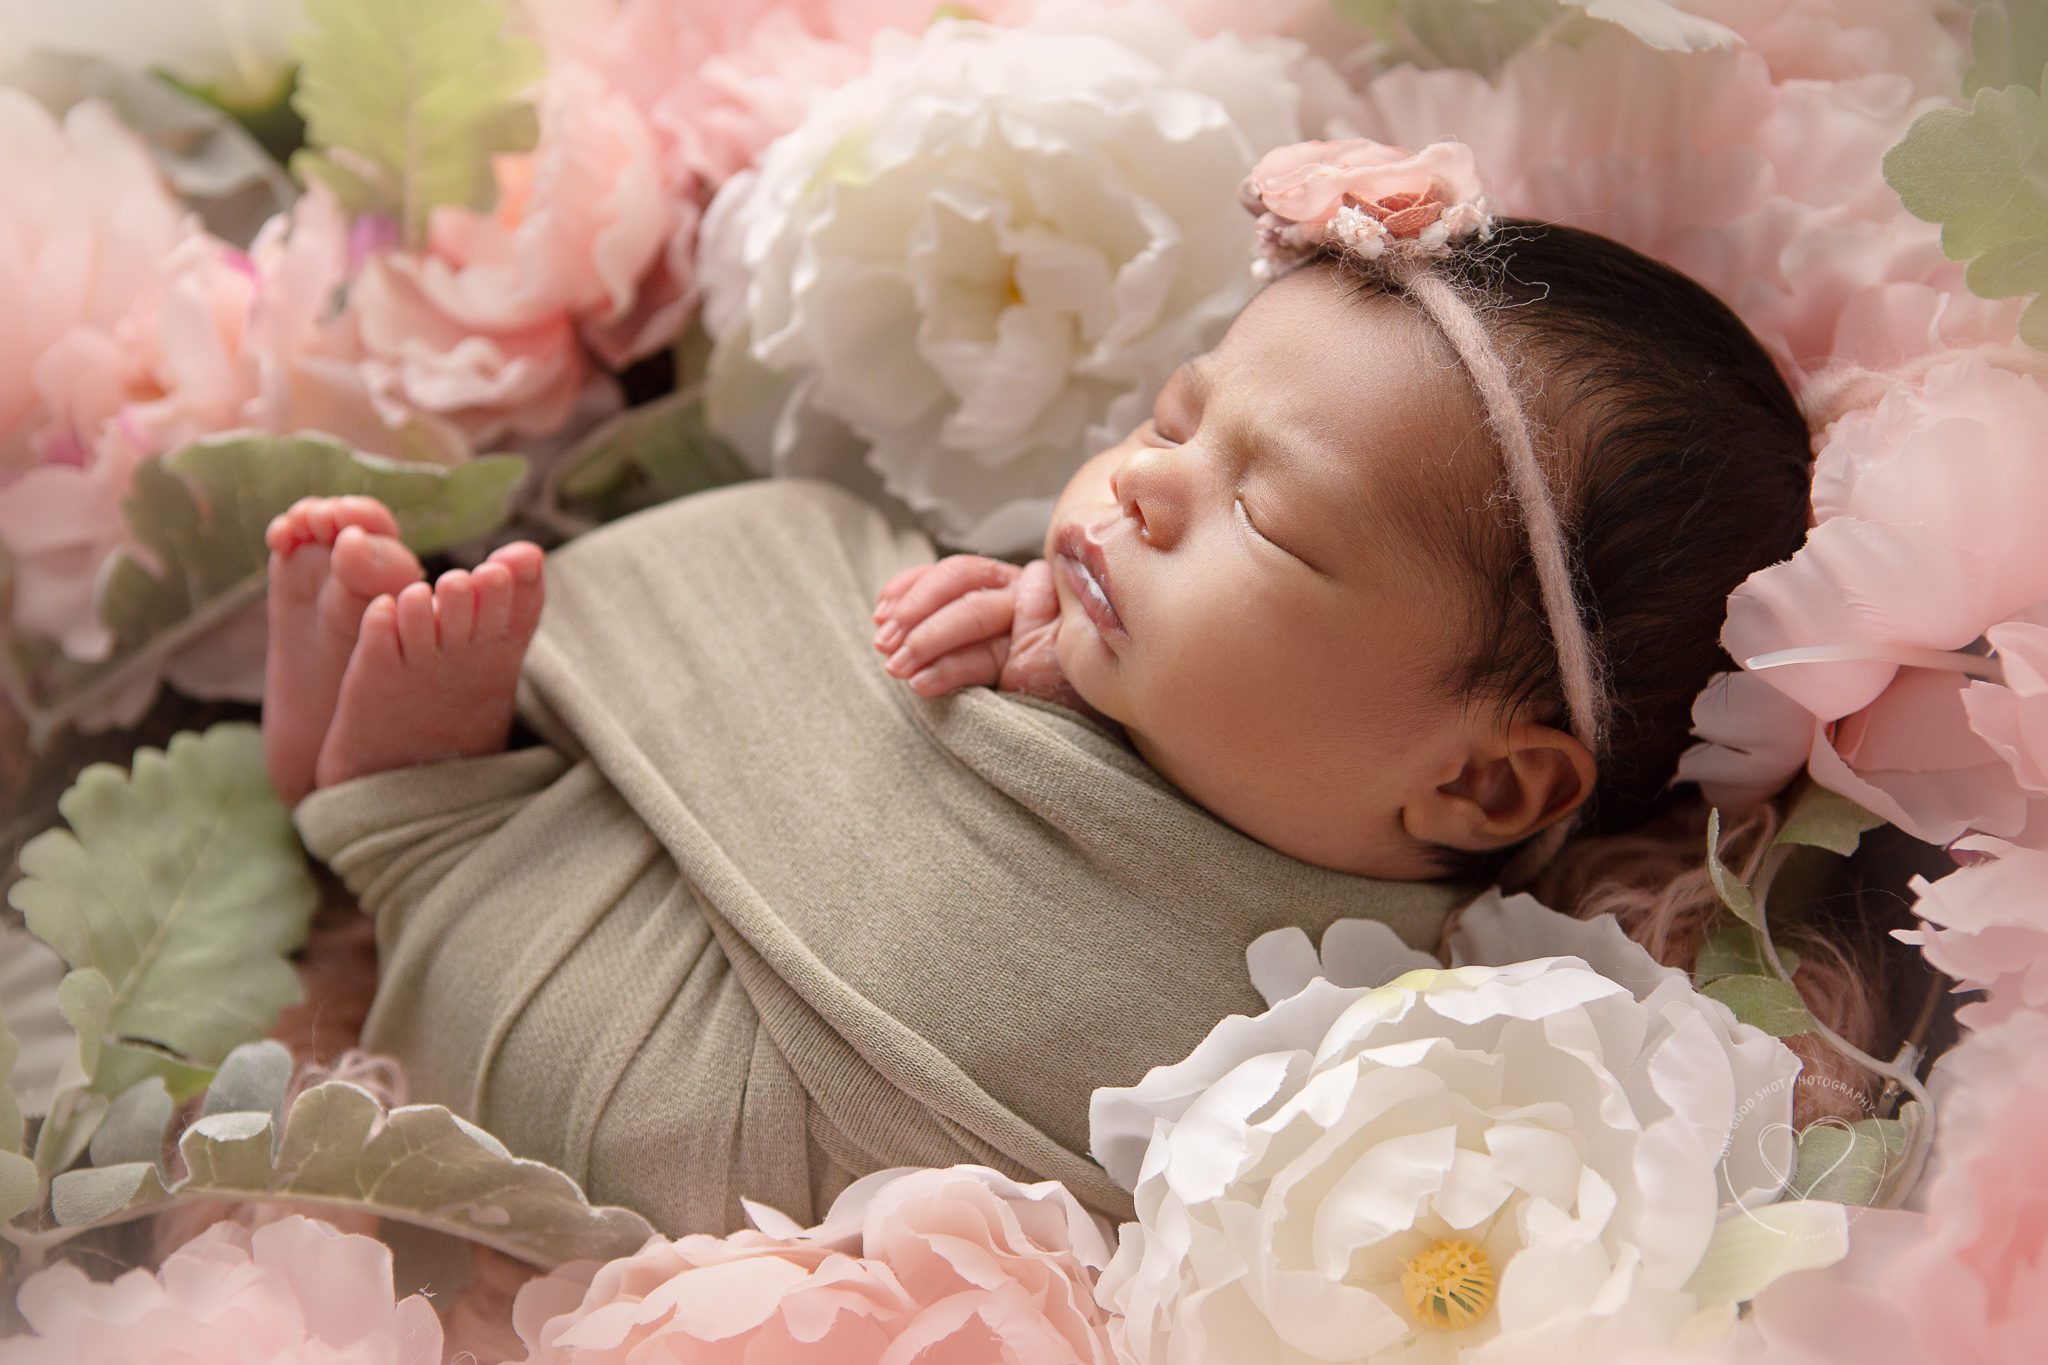 Newborn girl, wrapped in light green, fingers and toes showing, lying in floral wreath